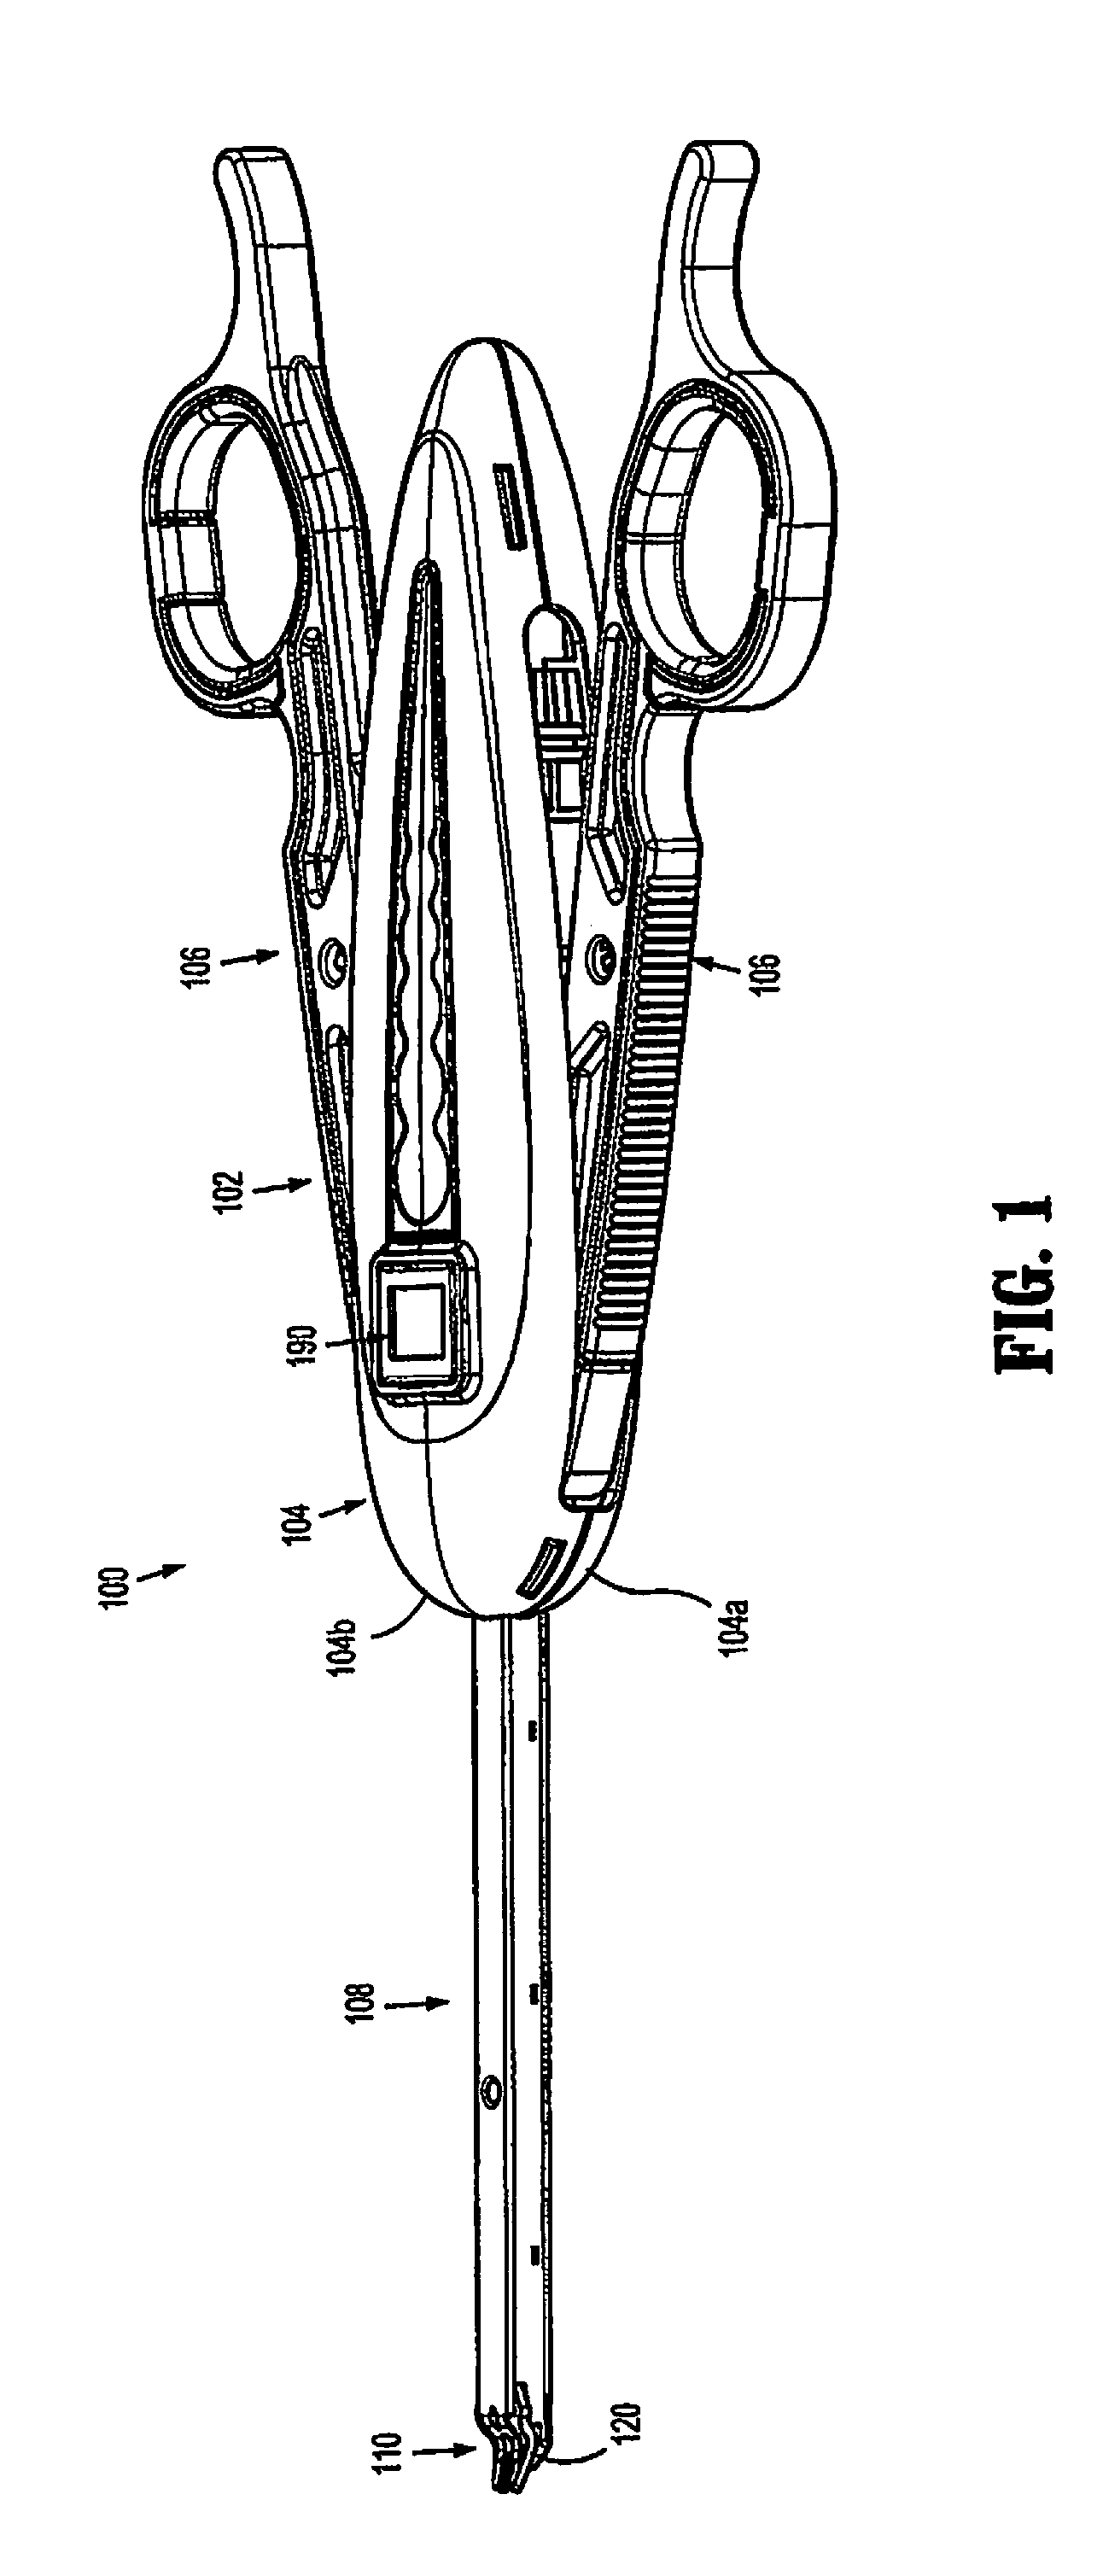 Surgical clip appliers